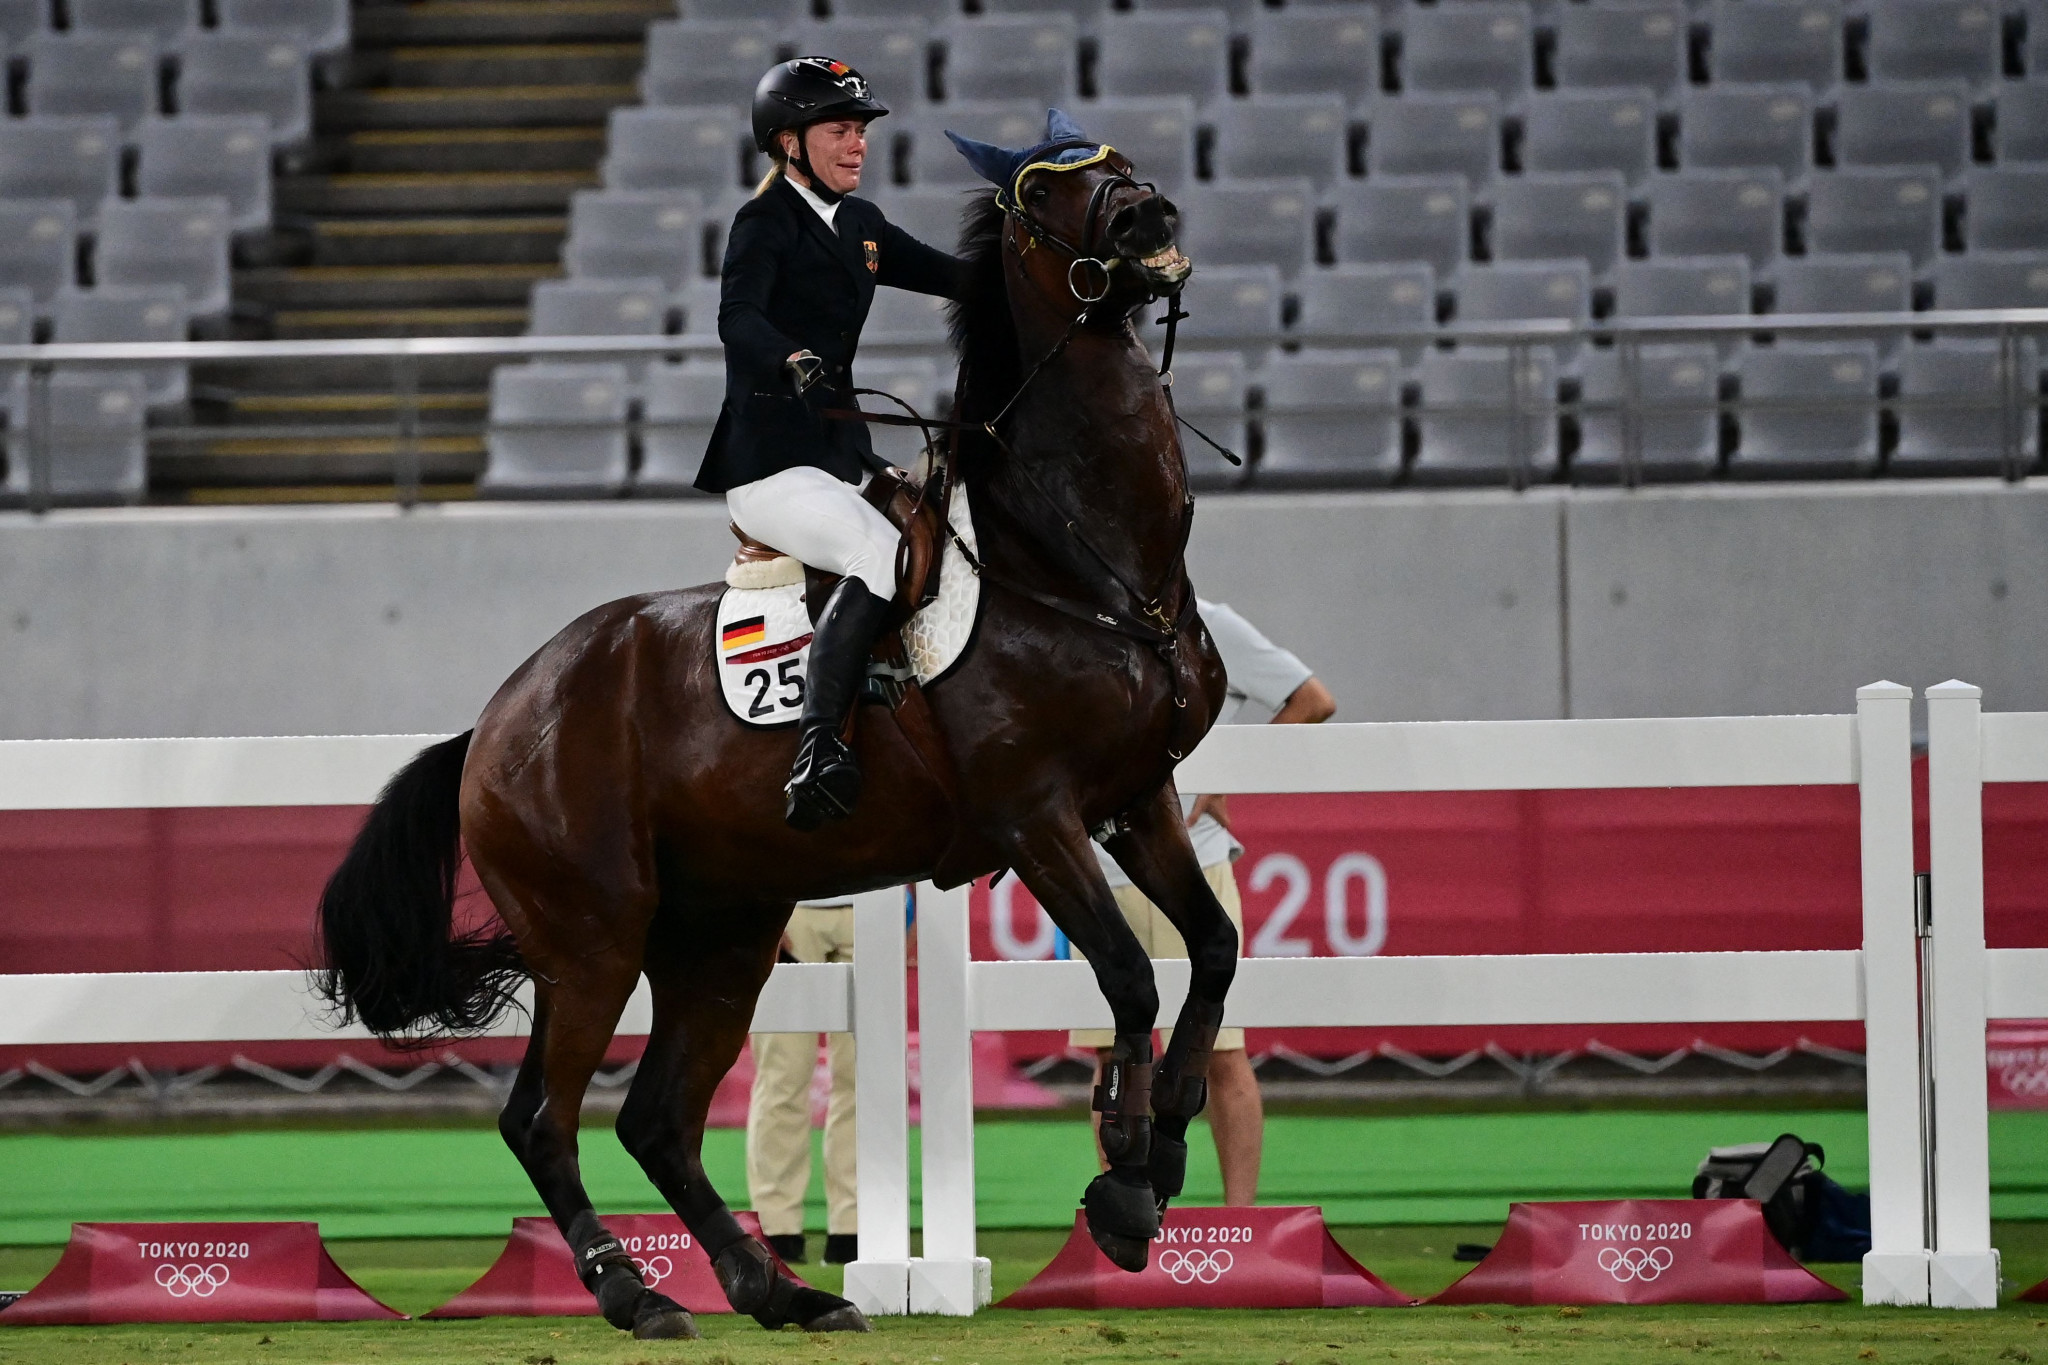 A horse-abuse scandal at Tokyo 2020 led to riding being dropped from modern pentathlon - but not until after Paris 2024 ©Getty Images